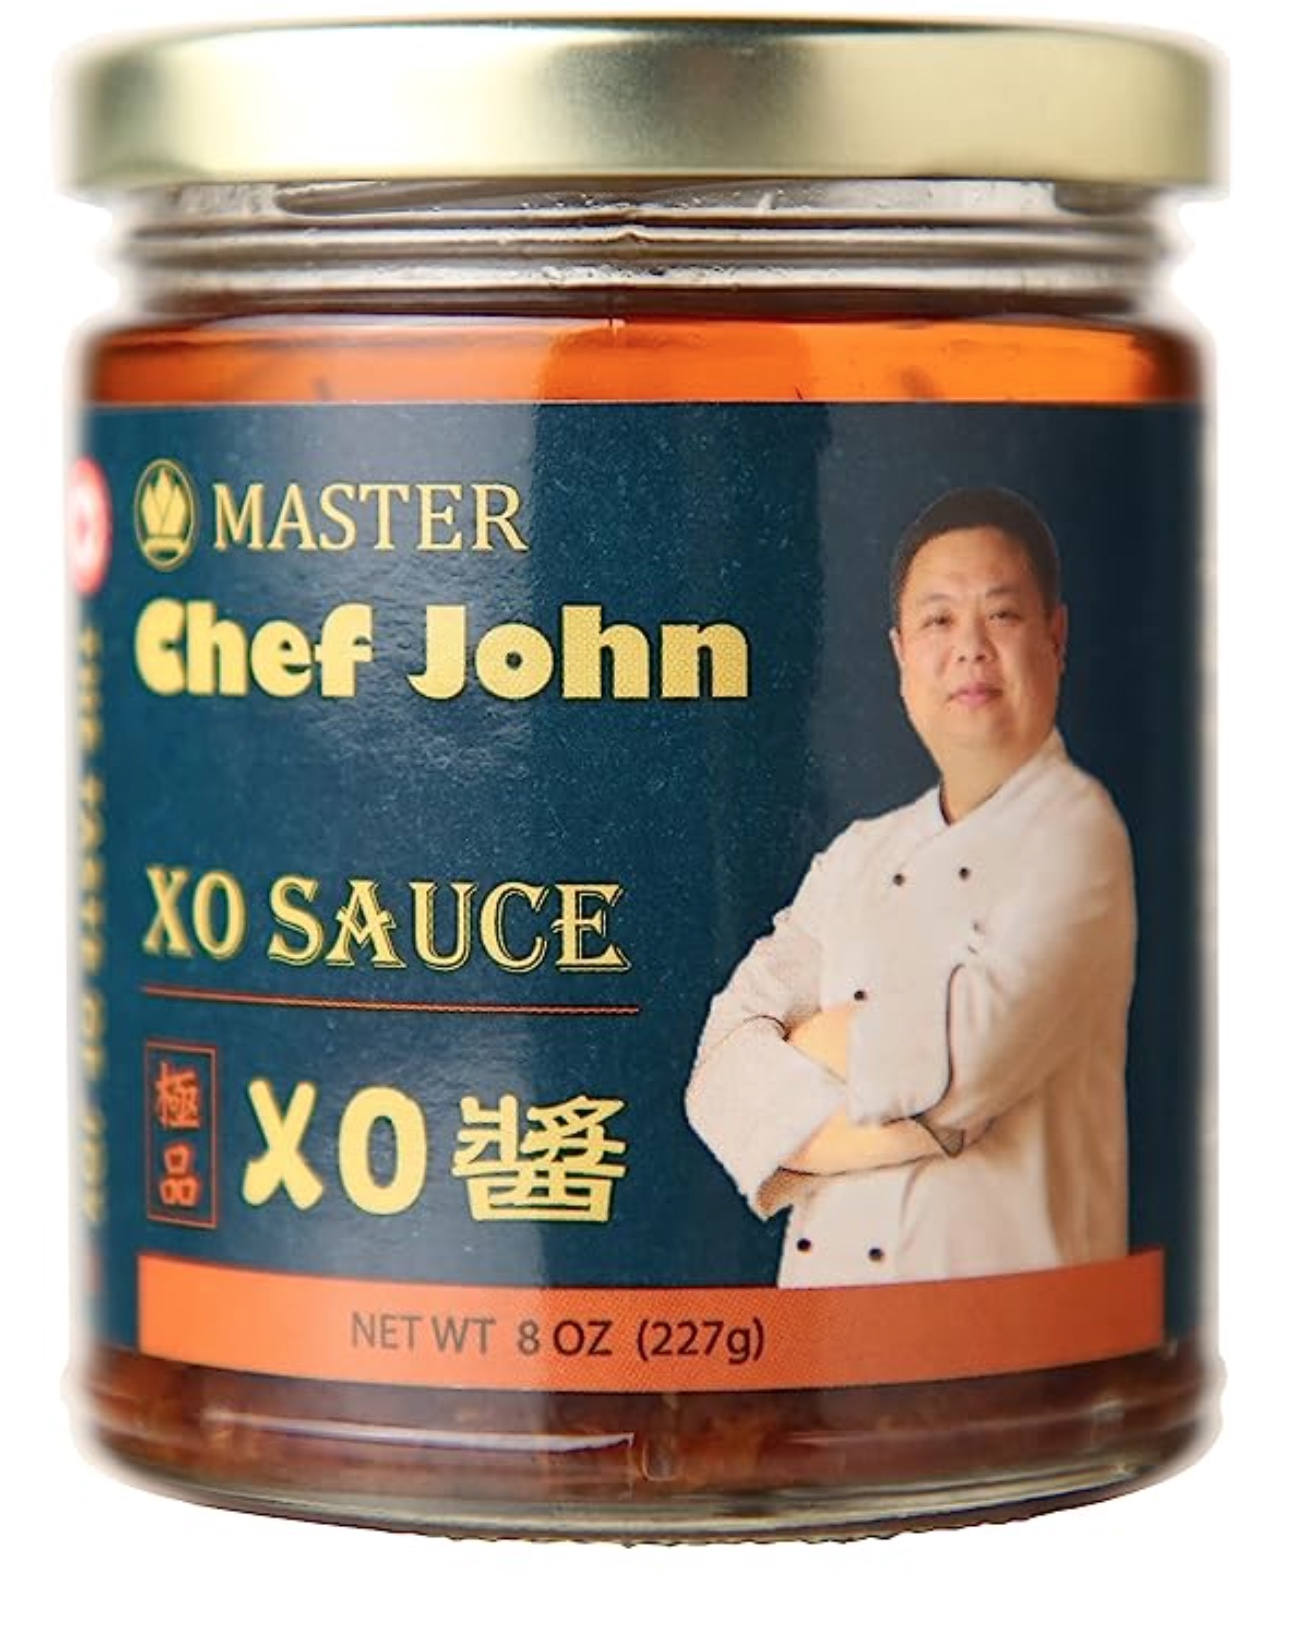 Master Chef John Exquisite XO Sauce, Loaded with Umami Flavors of Dried Scallops & Shrimps, All Natural Umami XO Sauce, No Flavor Enhancers, Excellent Addition to Any Dish, 8 OZ, Made in Canada.